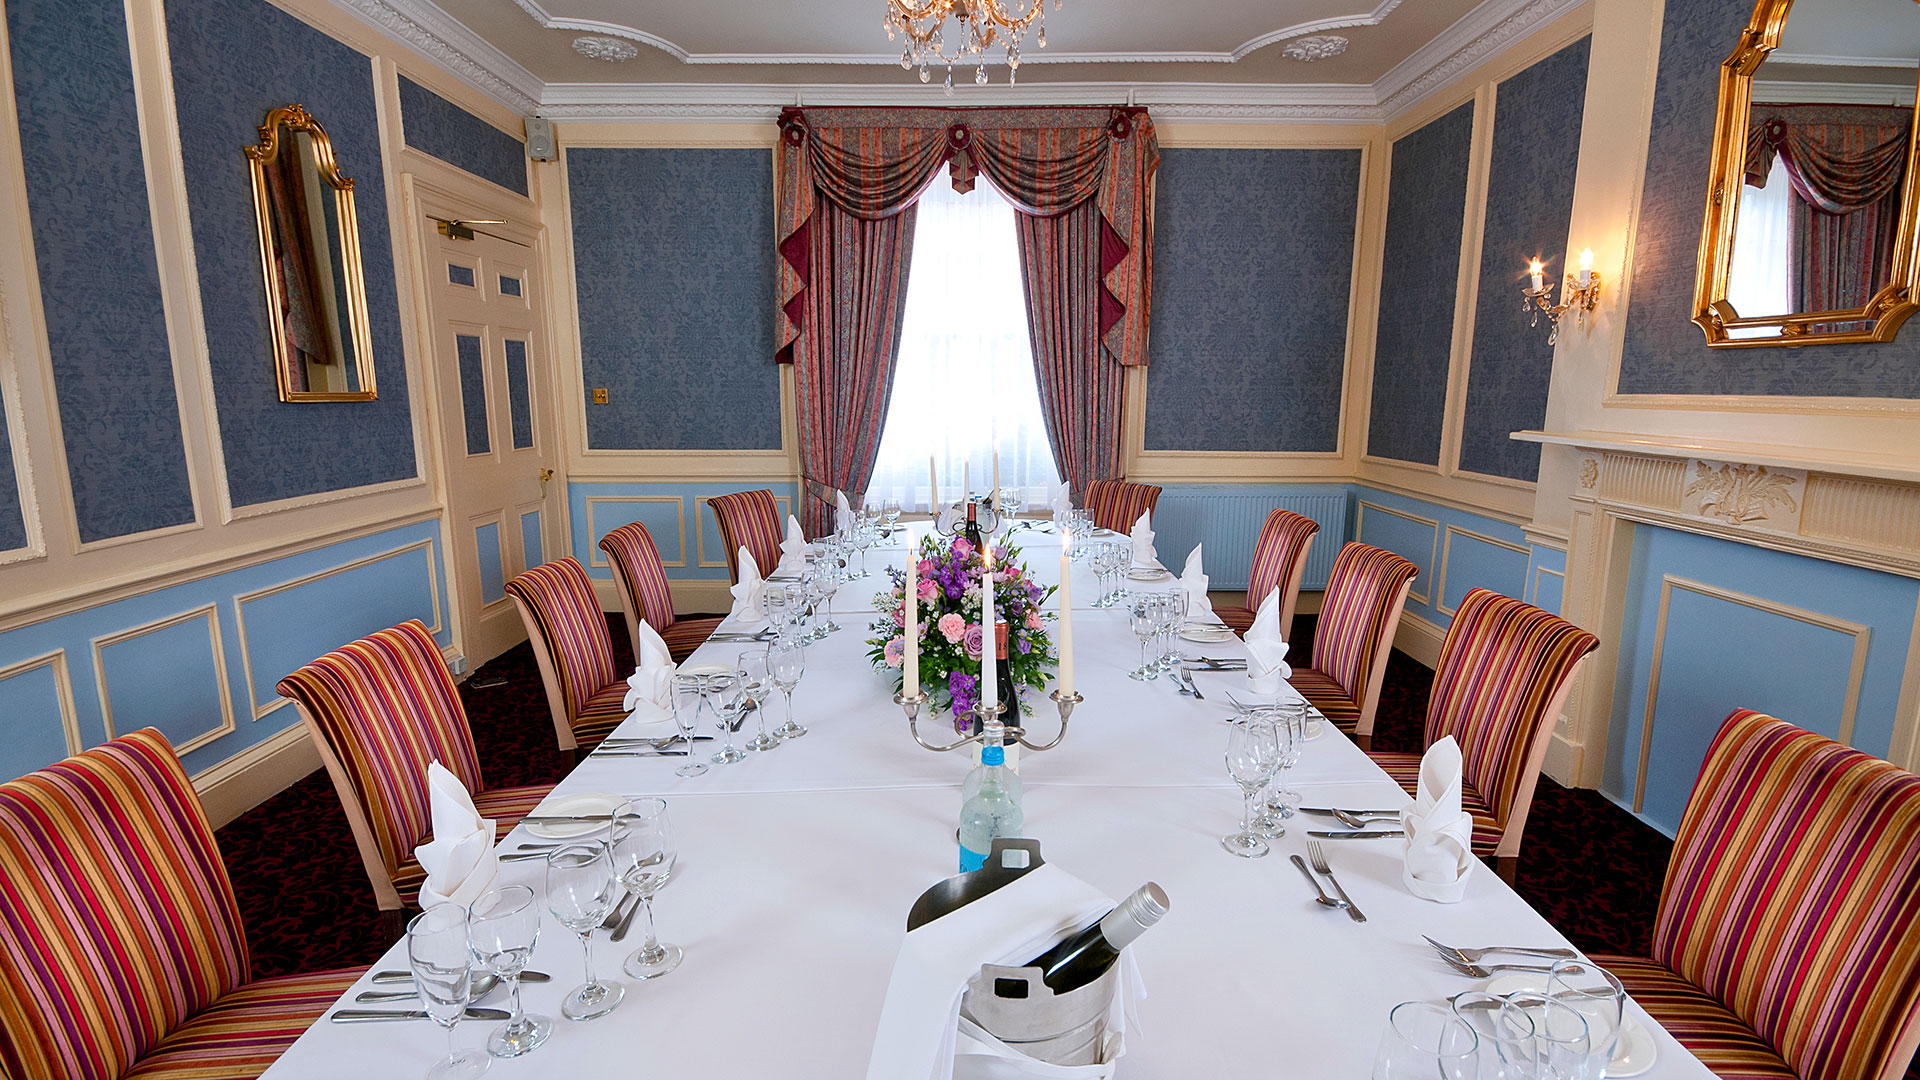 Conference room at Milford Hall Hotel